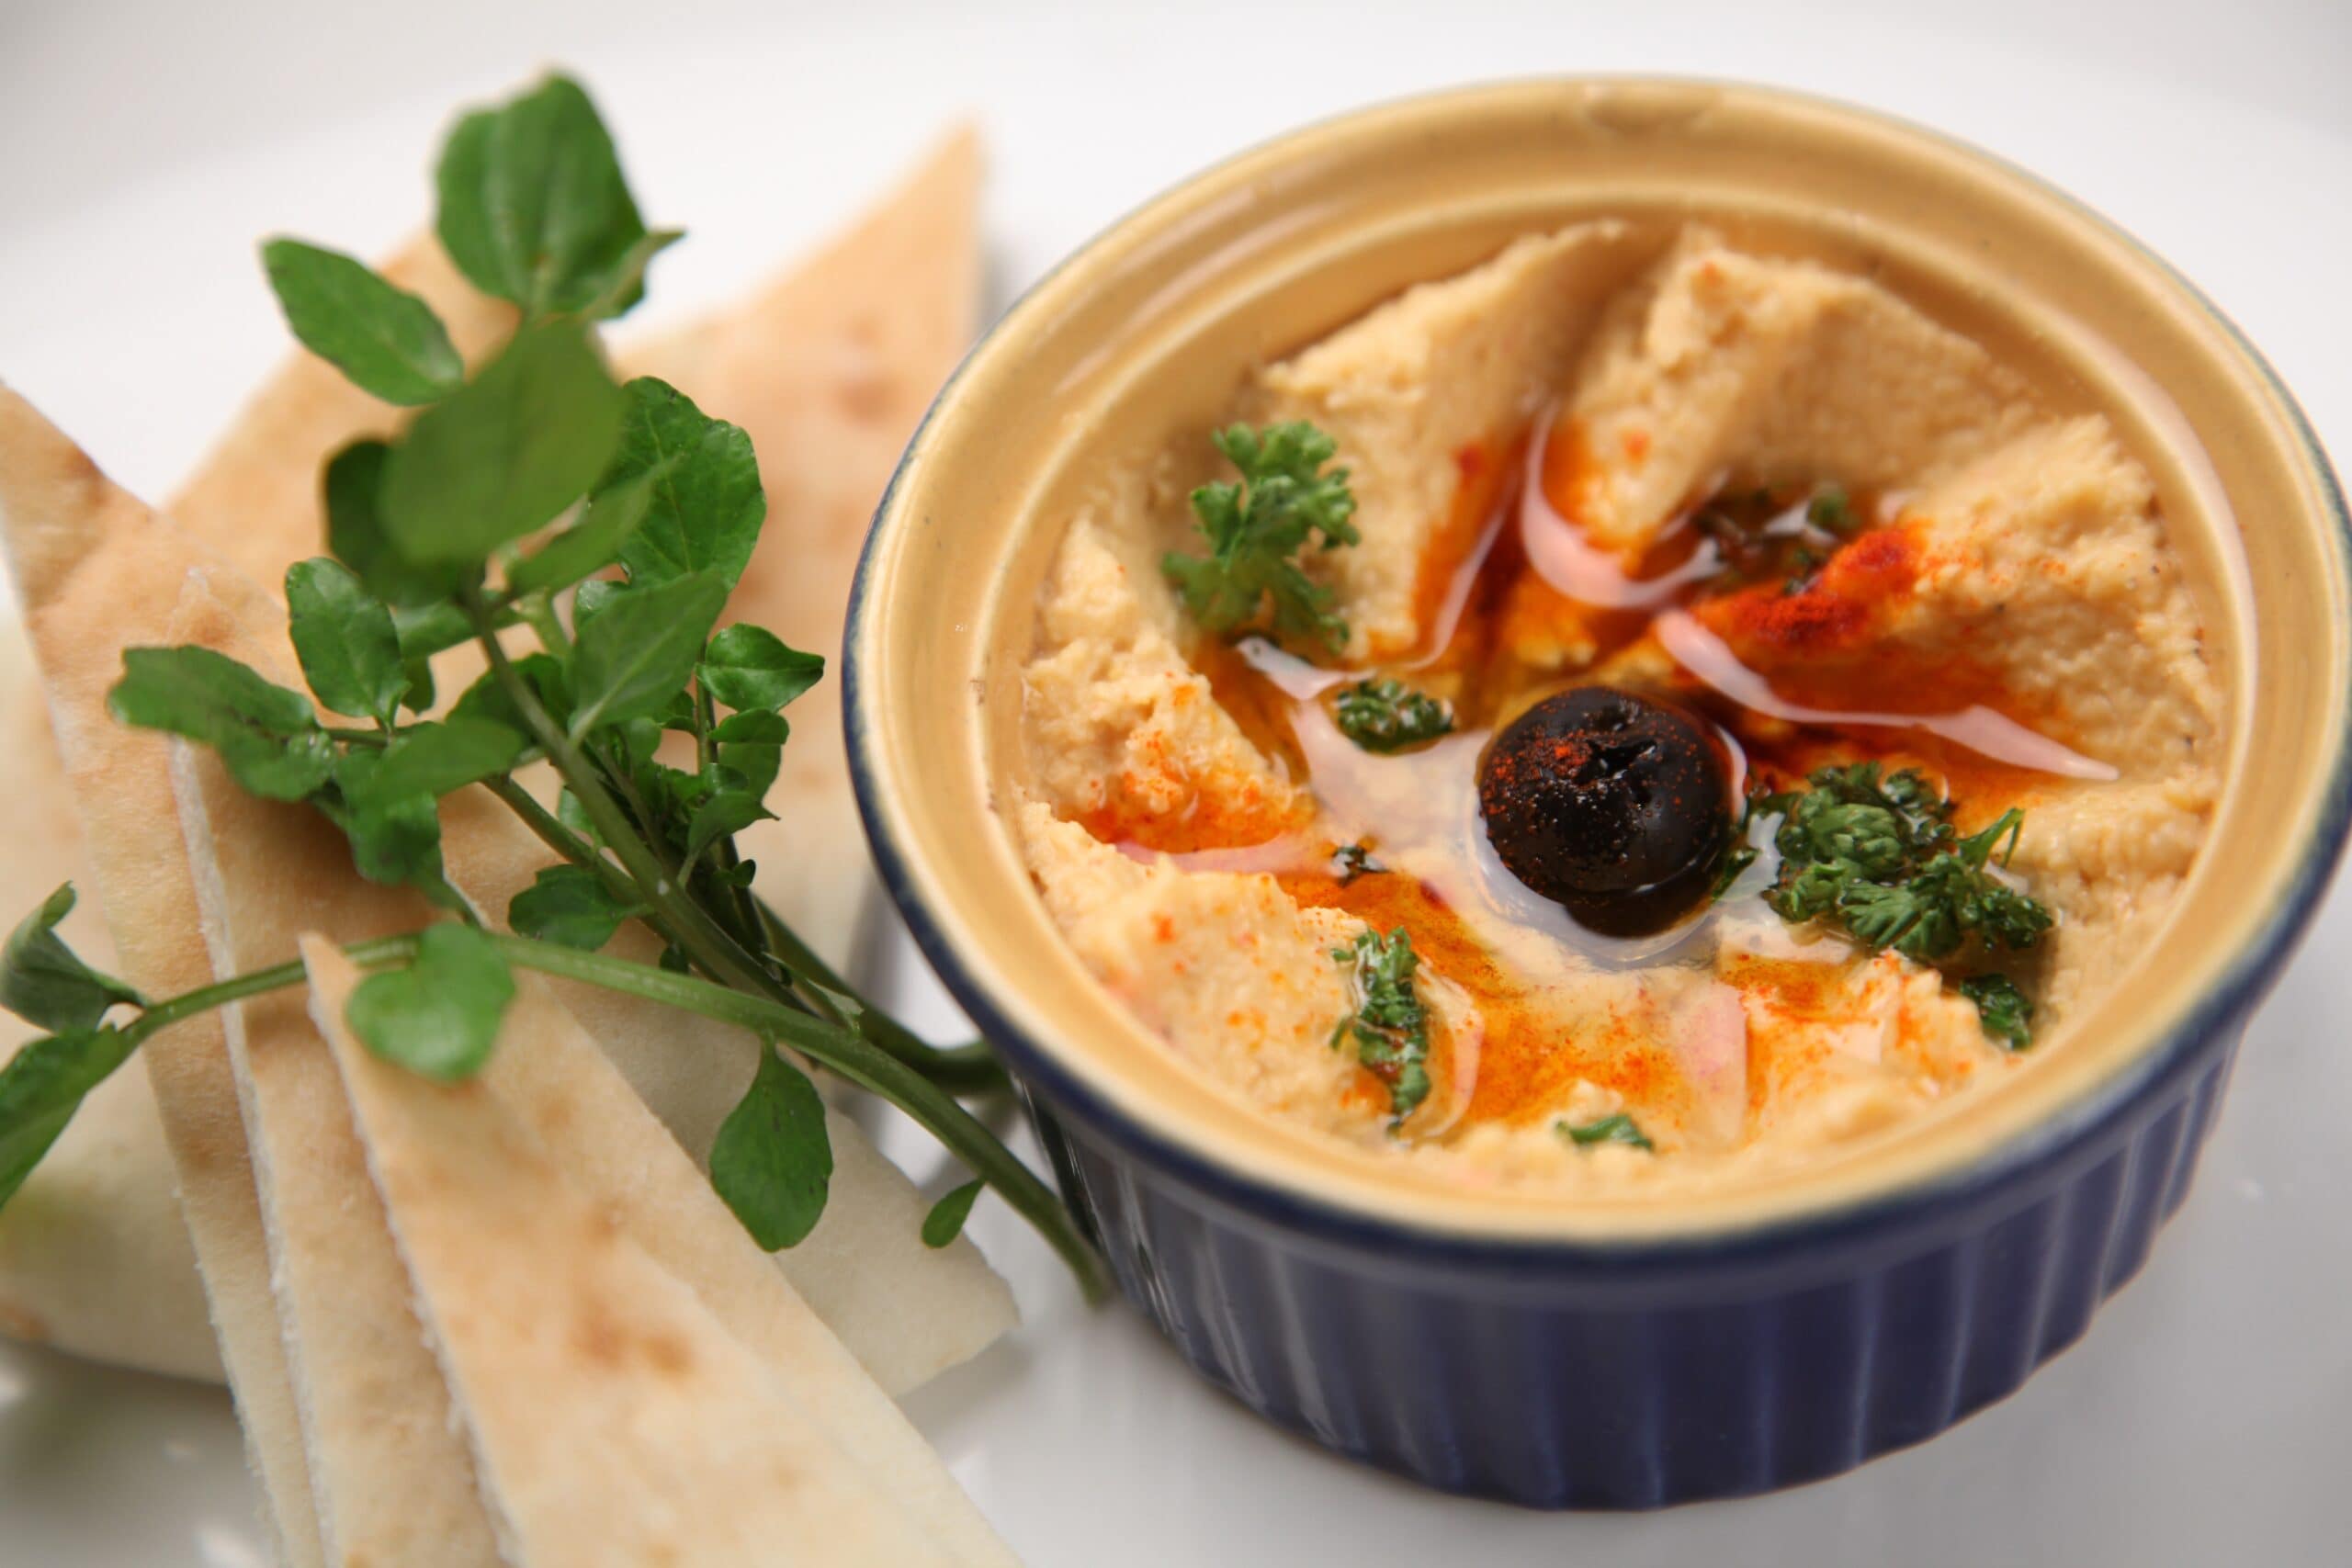 Hummus is so popular that 2 countries had declared war to find out which country’s Hummus was better. True or False?